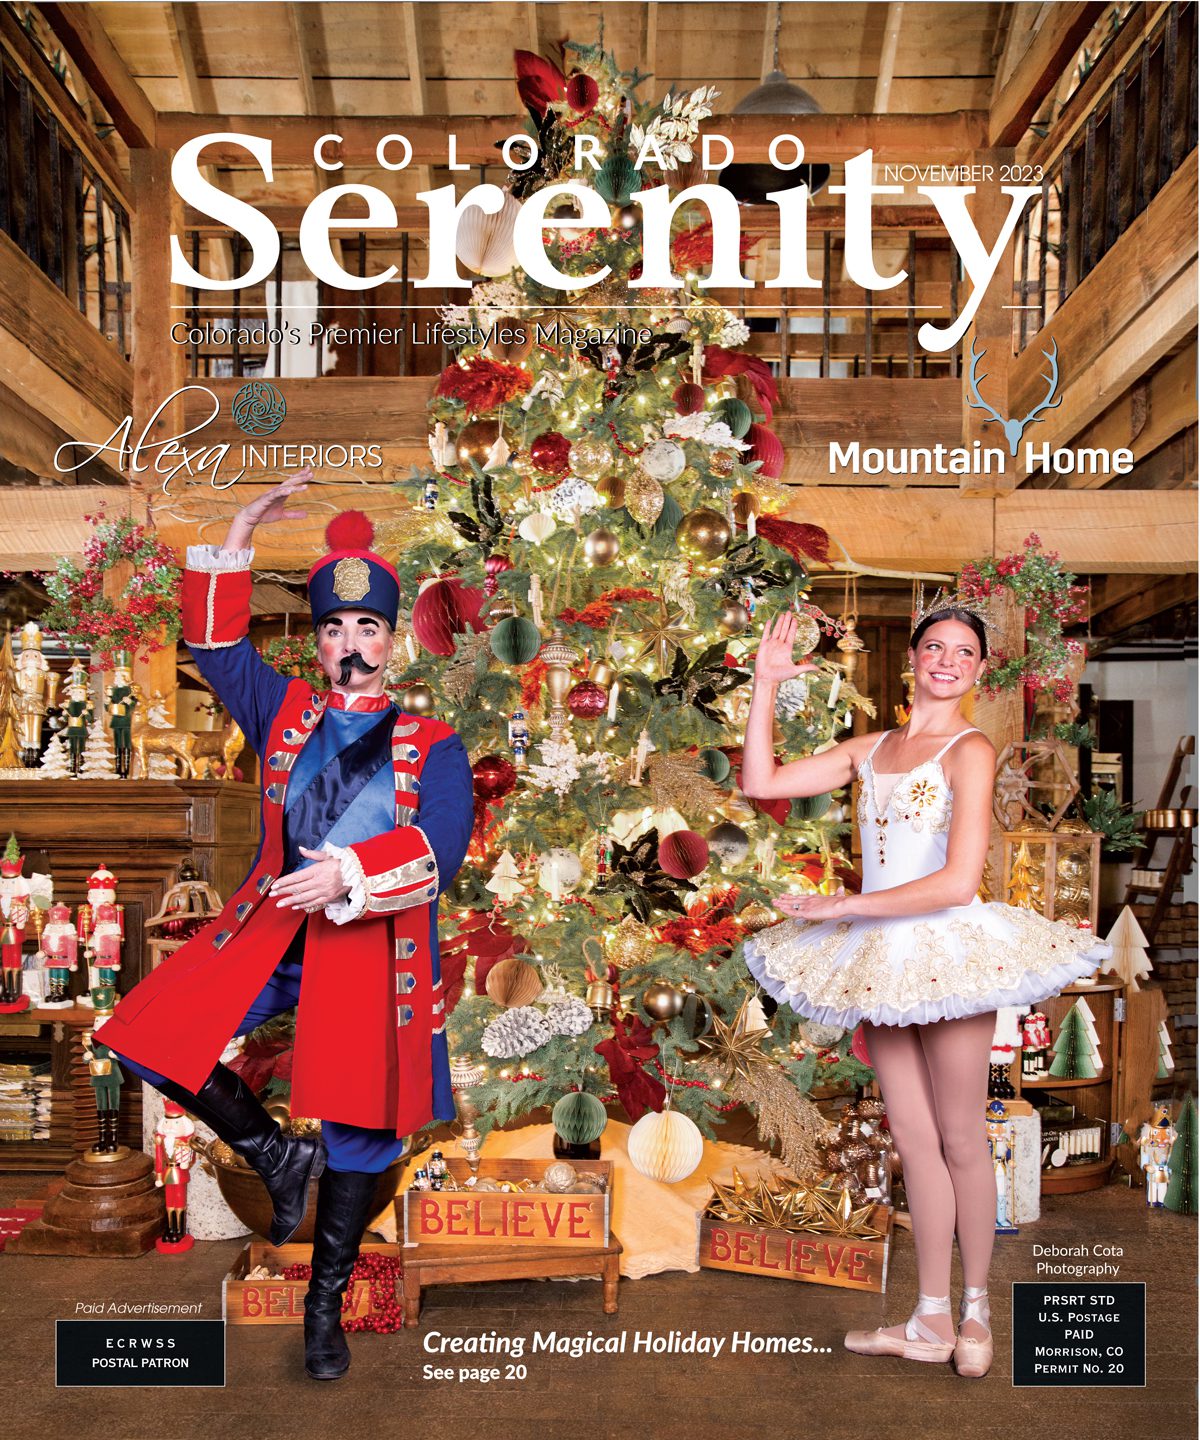 Mountain Home Cover with Christmas Tree and a Nutcracker and Ballerina